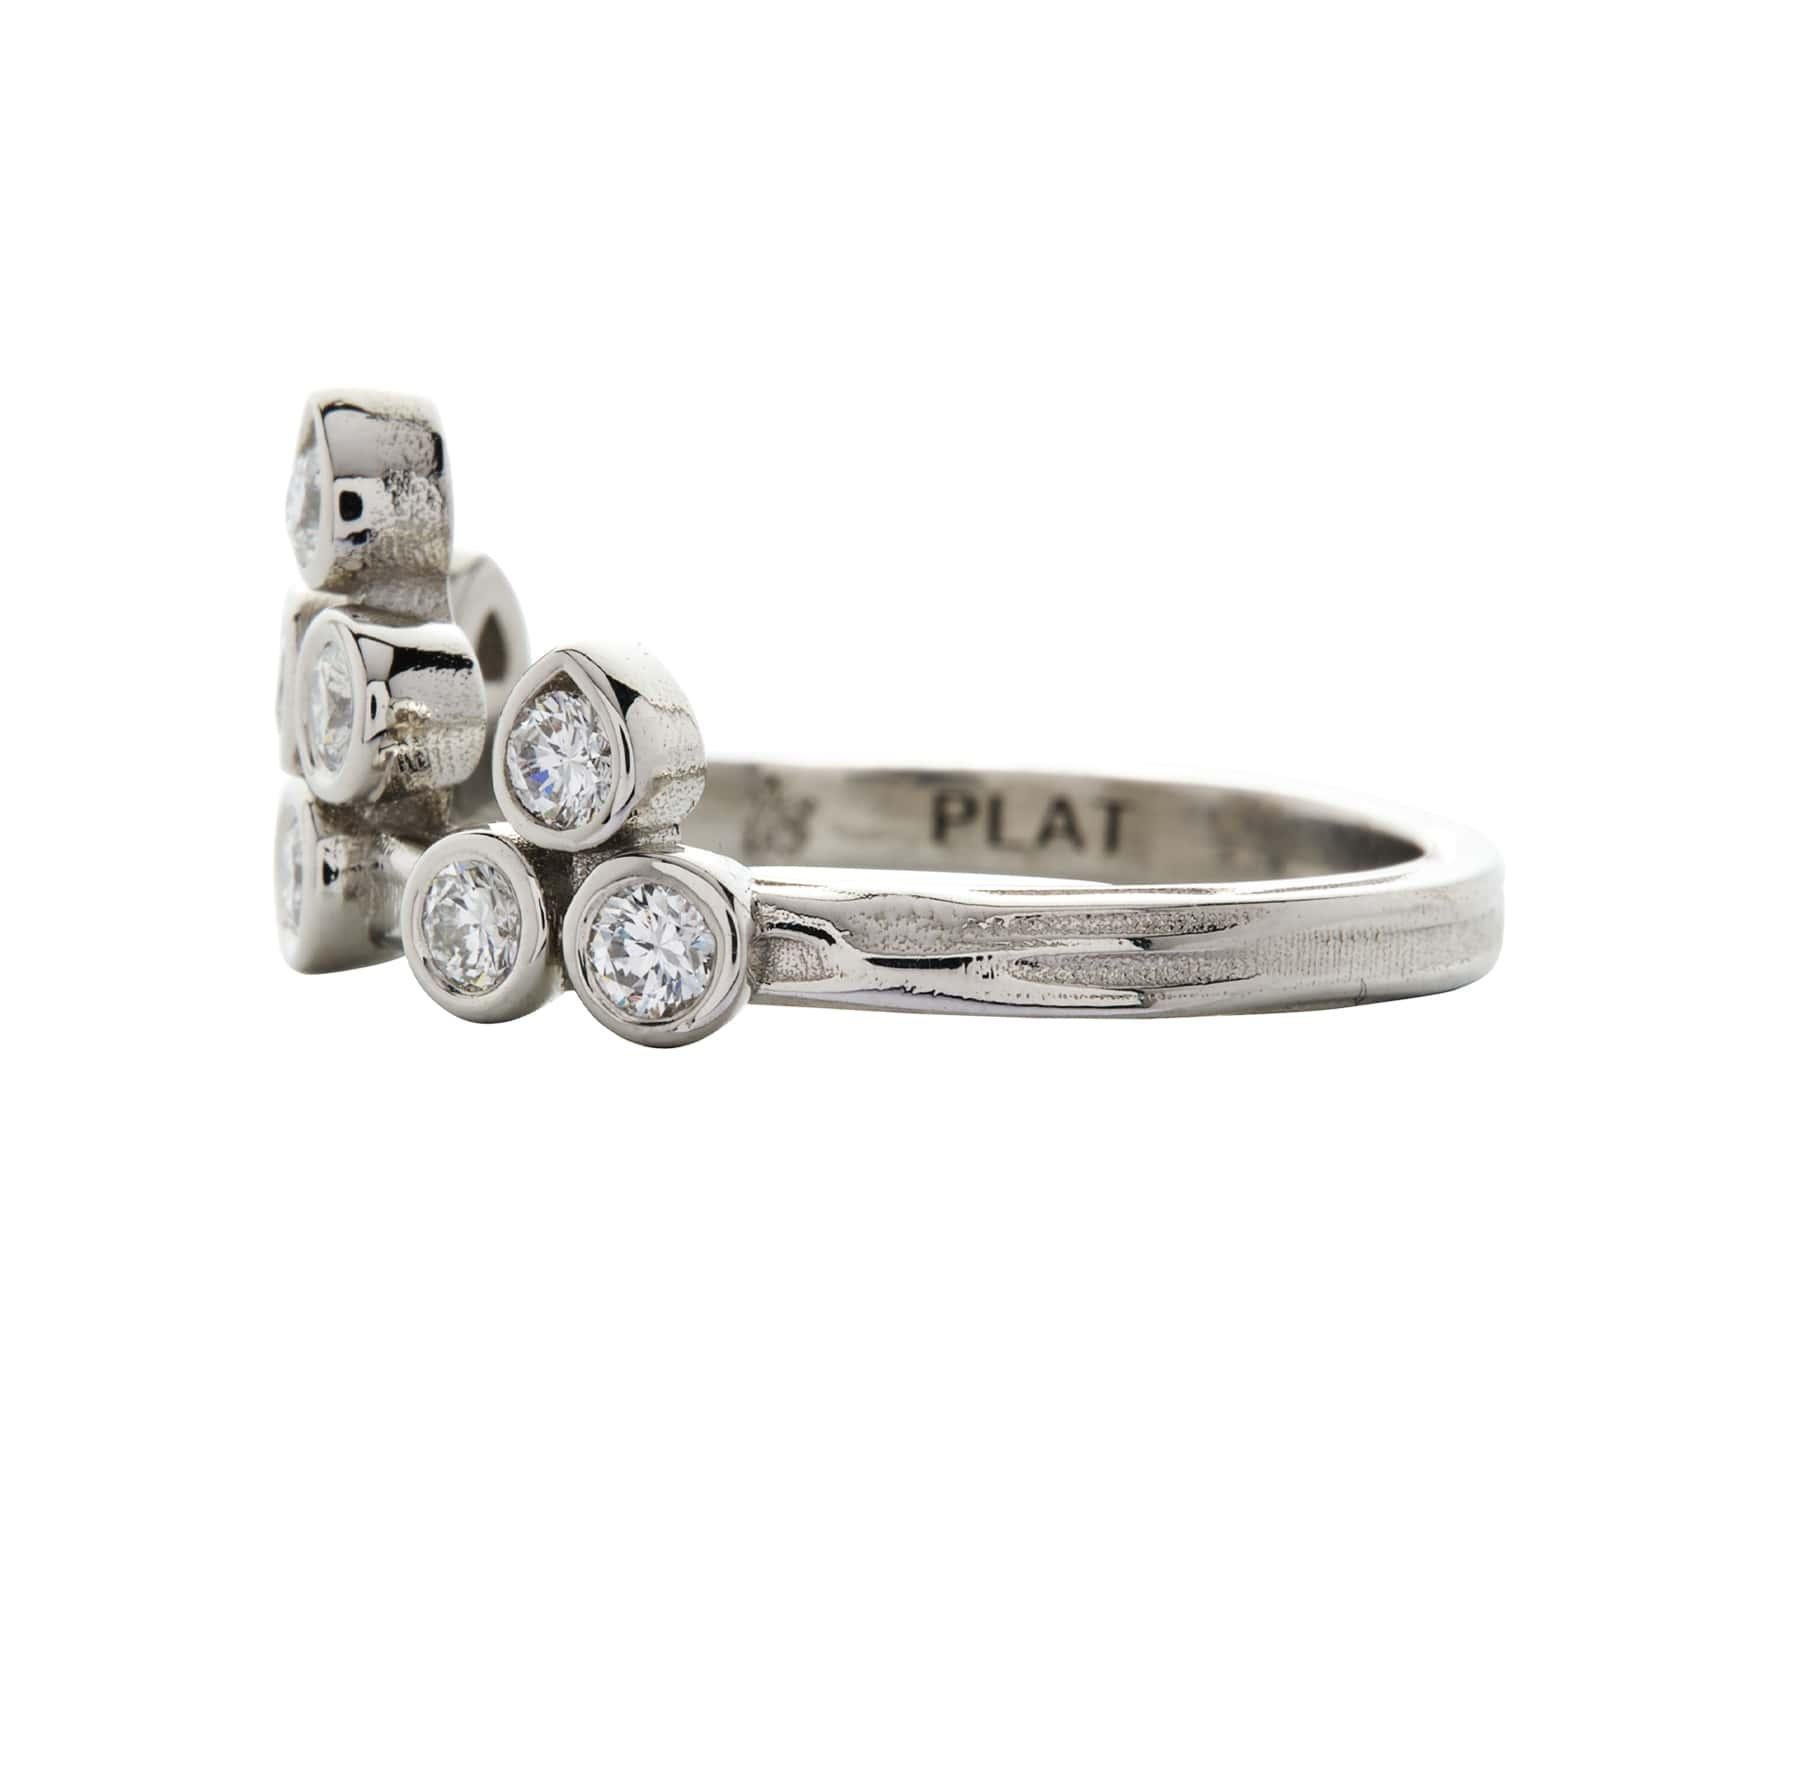 Created in luxurious platinum, a tiara-like configuration is formed by 10 bezel-set round brilliant diamonds. The top 3 settings are pear-shaped with their points facing upward. This ring can be worn alone or stacked, and in either direction on the